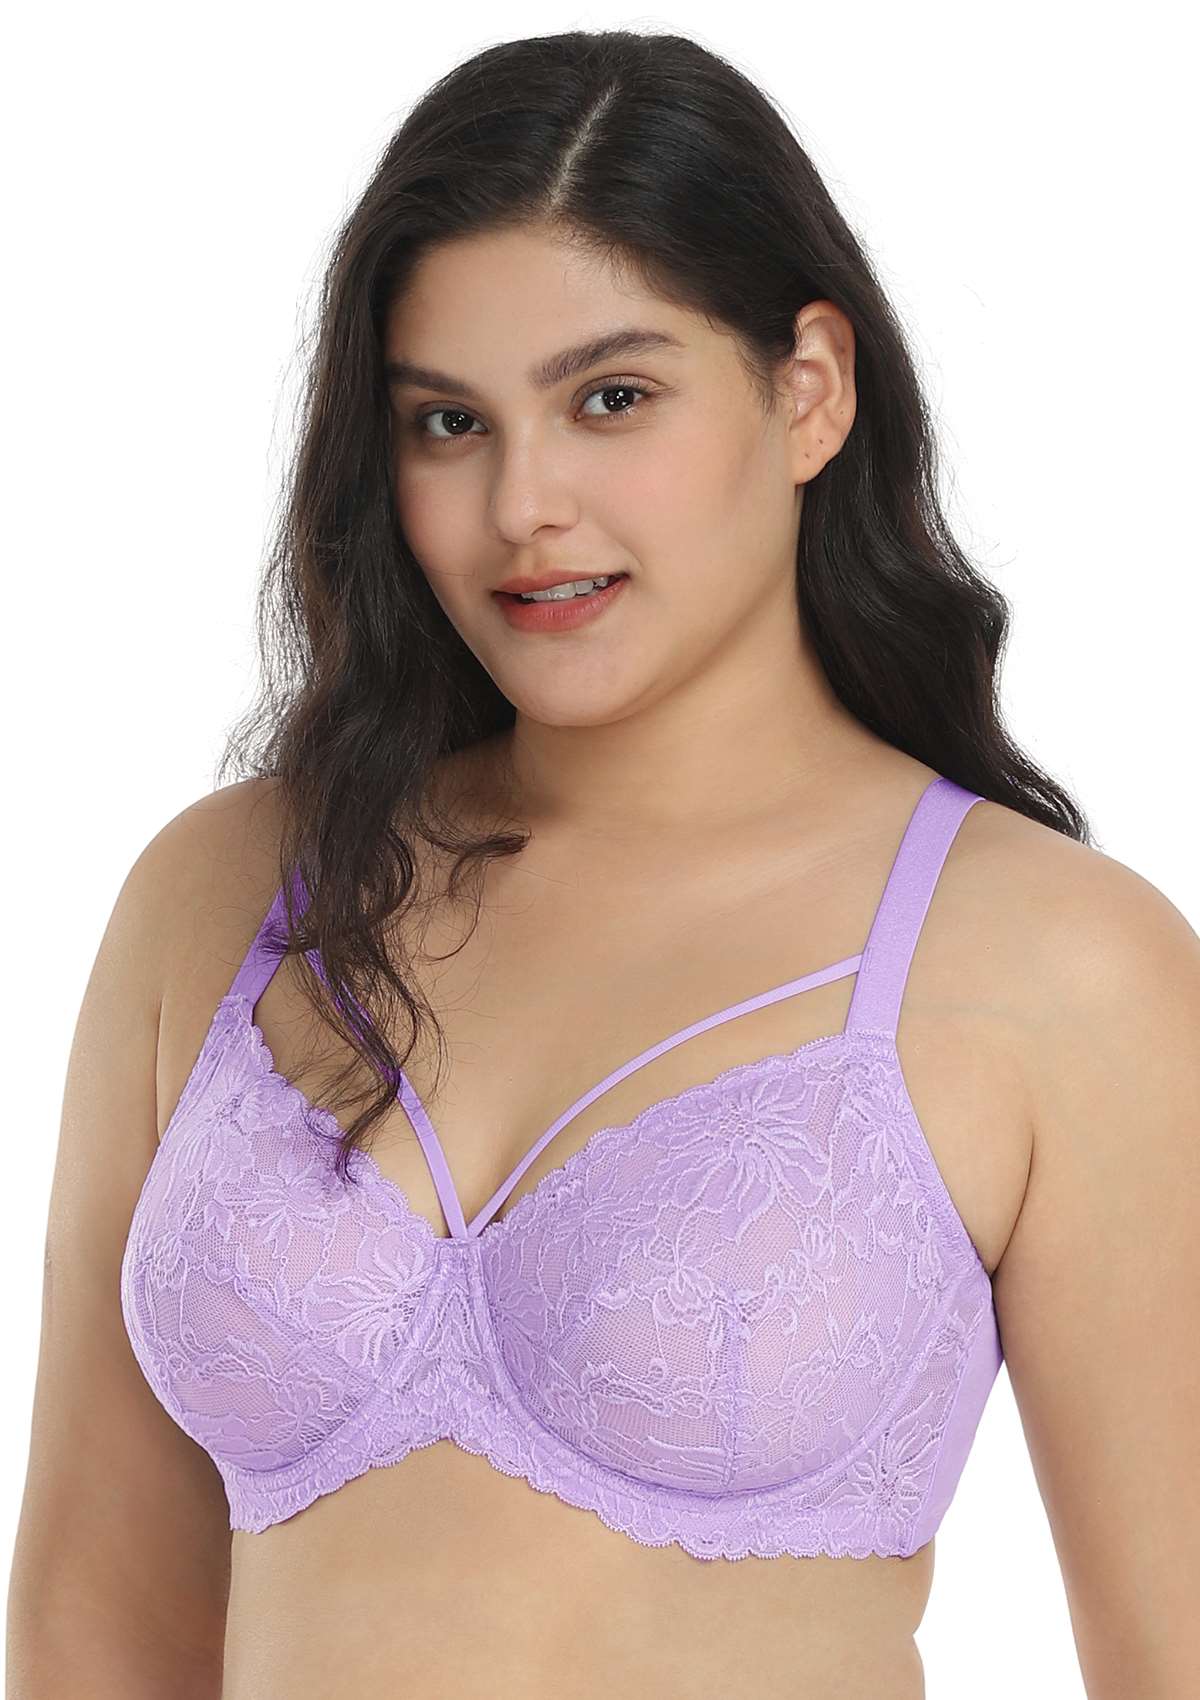 HSIA Pretty In Petals See-Through Lace Bra: Lift And Separate - Purple / 38 / C